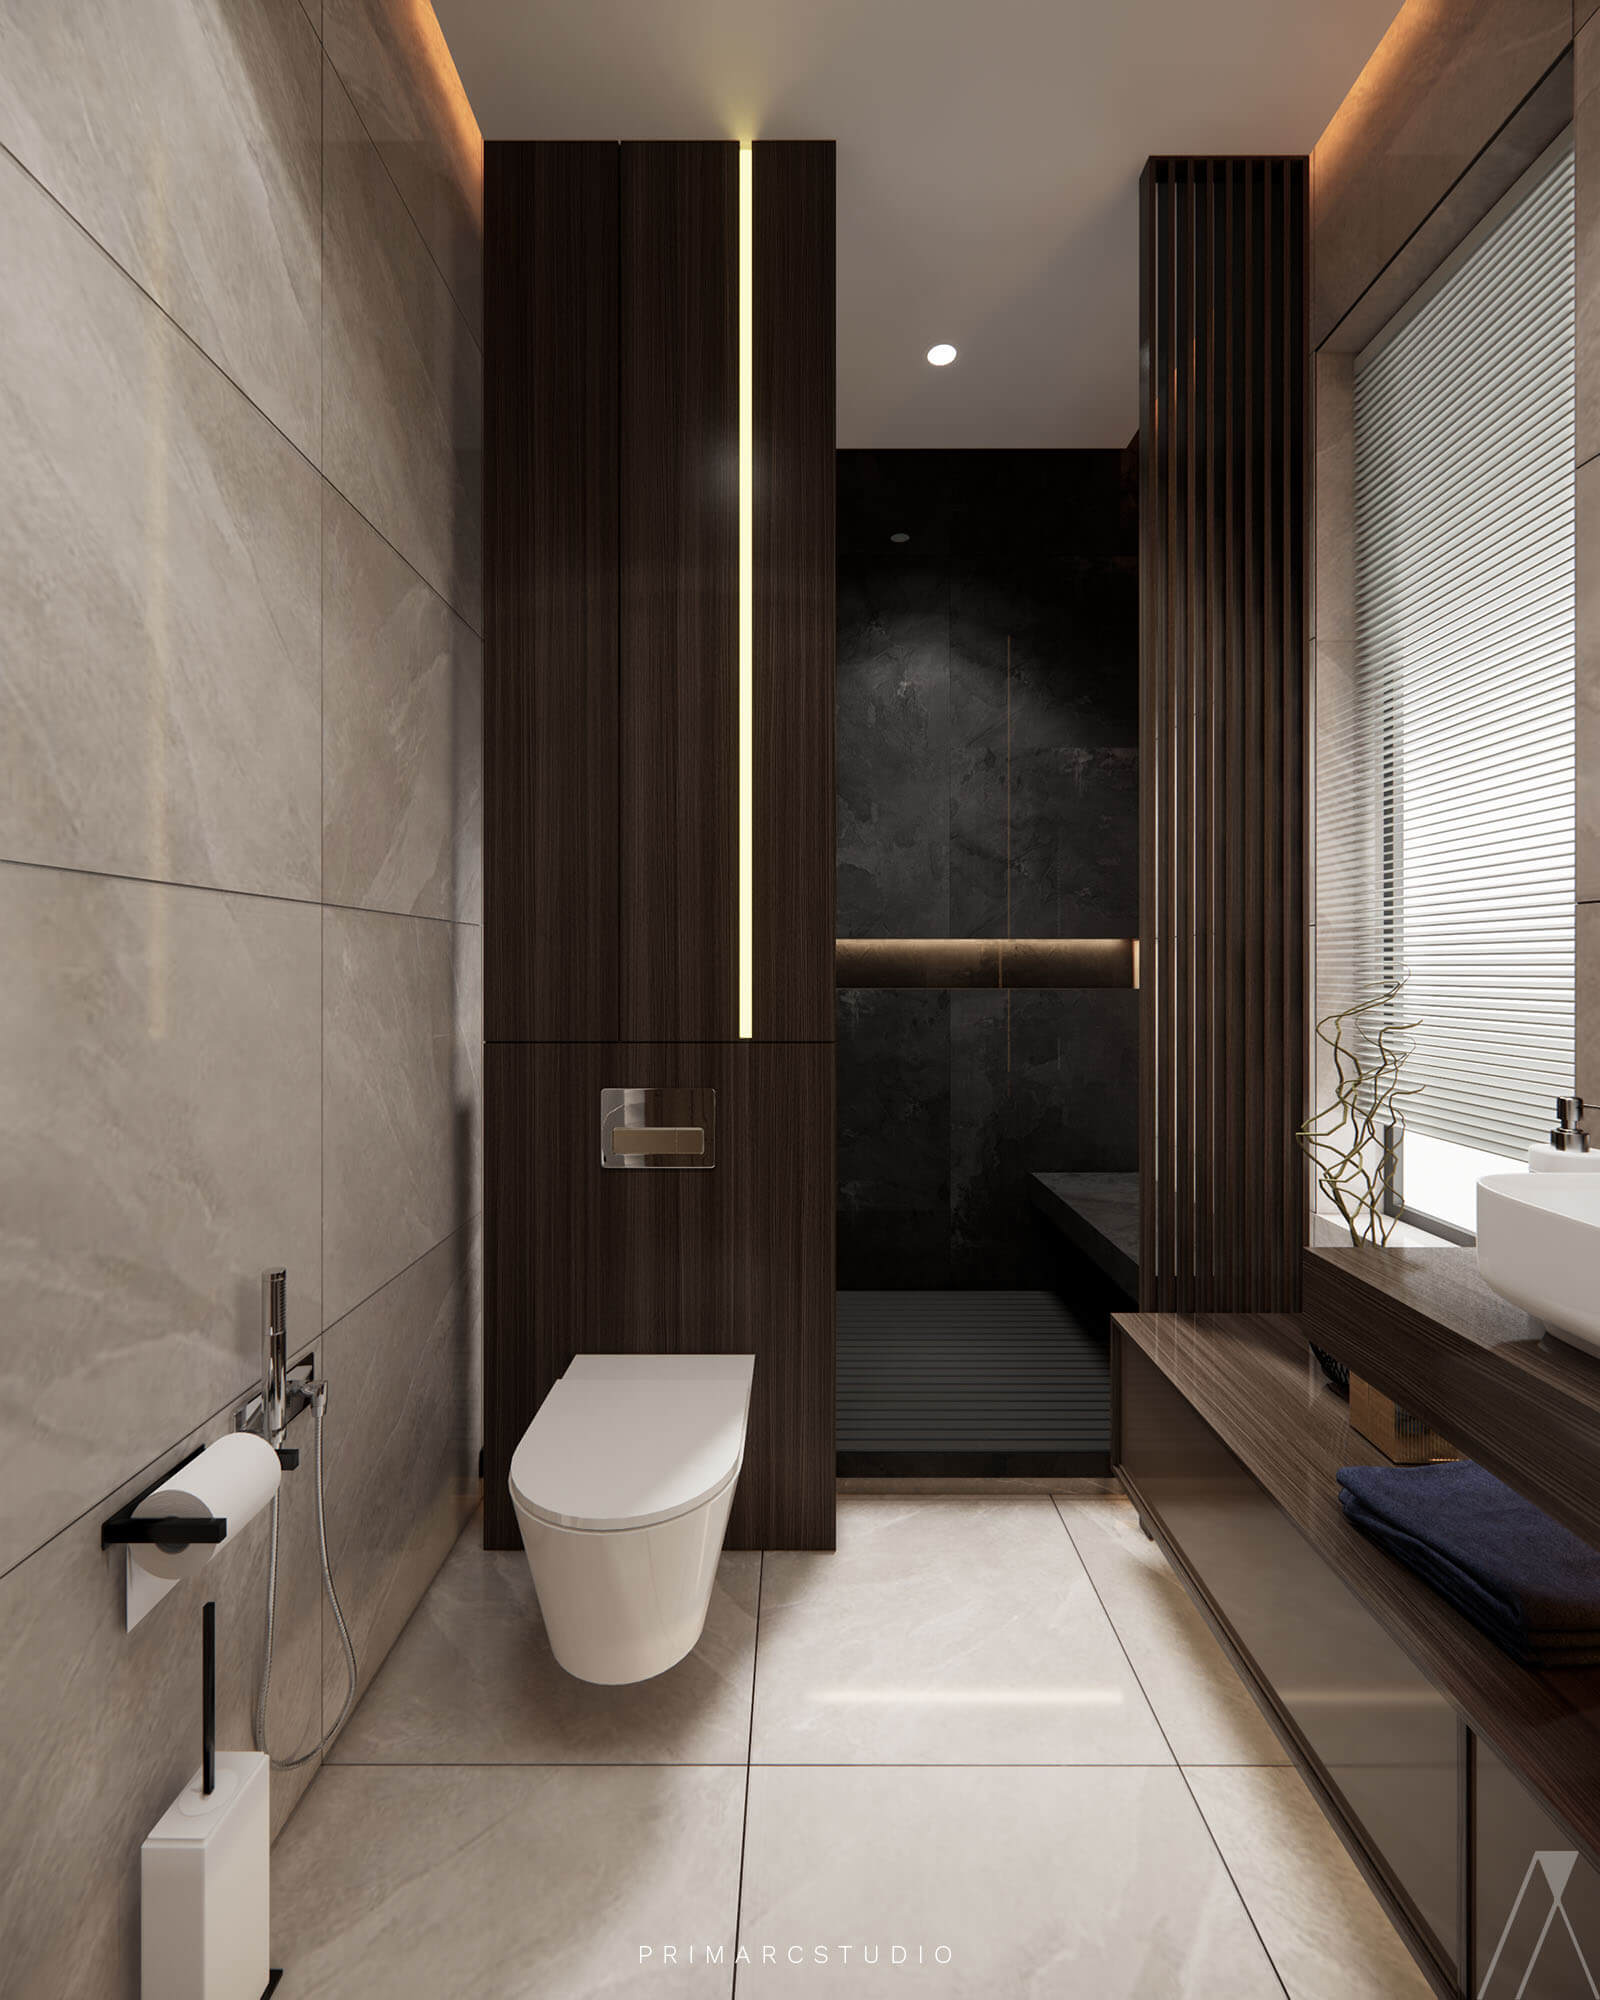 Washroom interior design in in wooden and beige colors